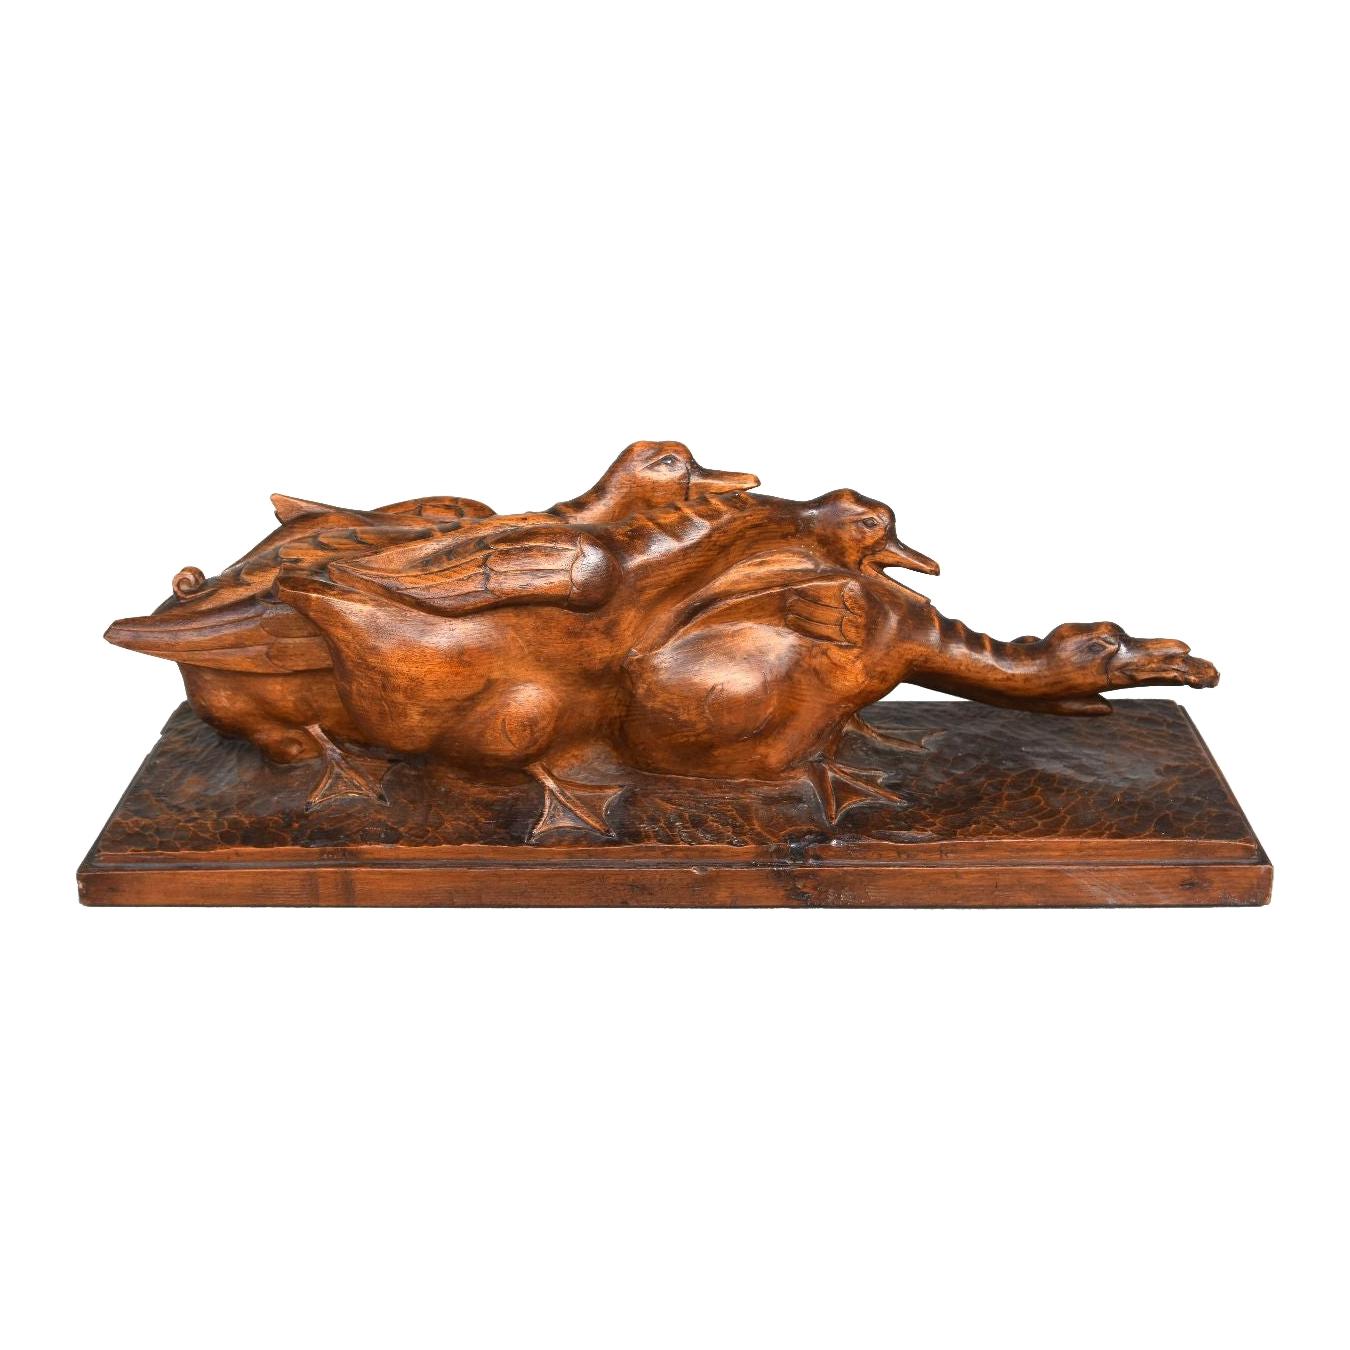 1930 Geese Fighting Over a Frog by H. Petrilly Art Deco Wooden Sculpture